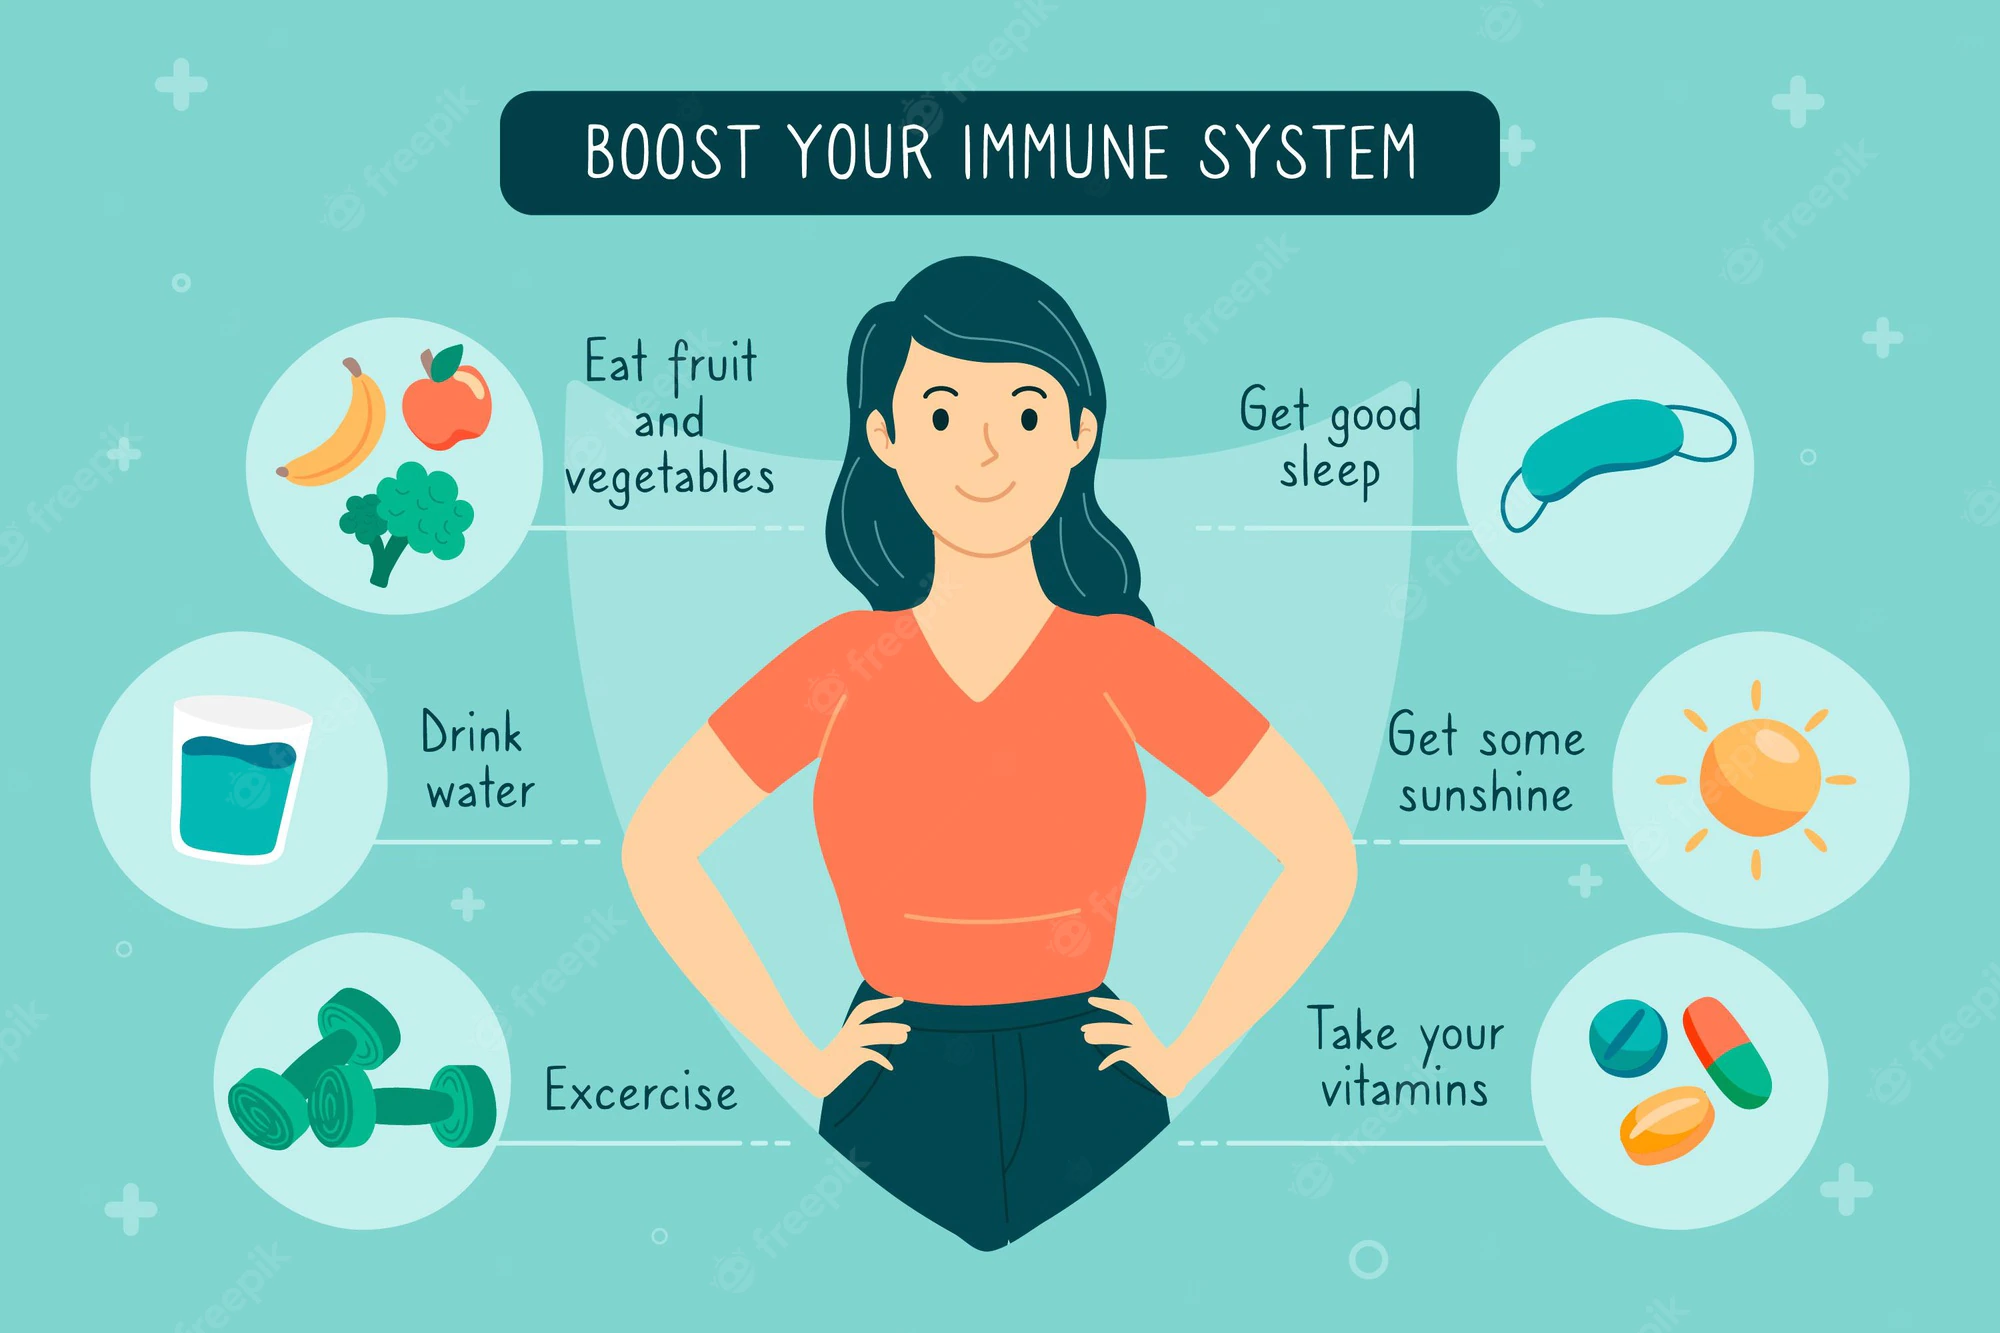 How to Boost Your Immune System in a Simple Way